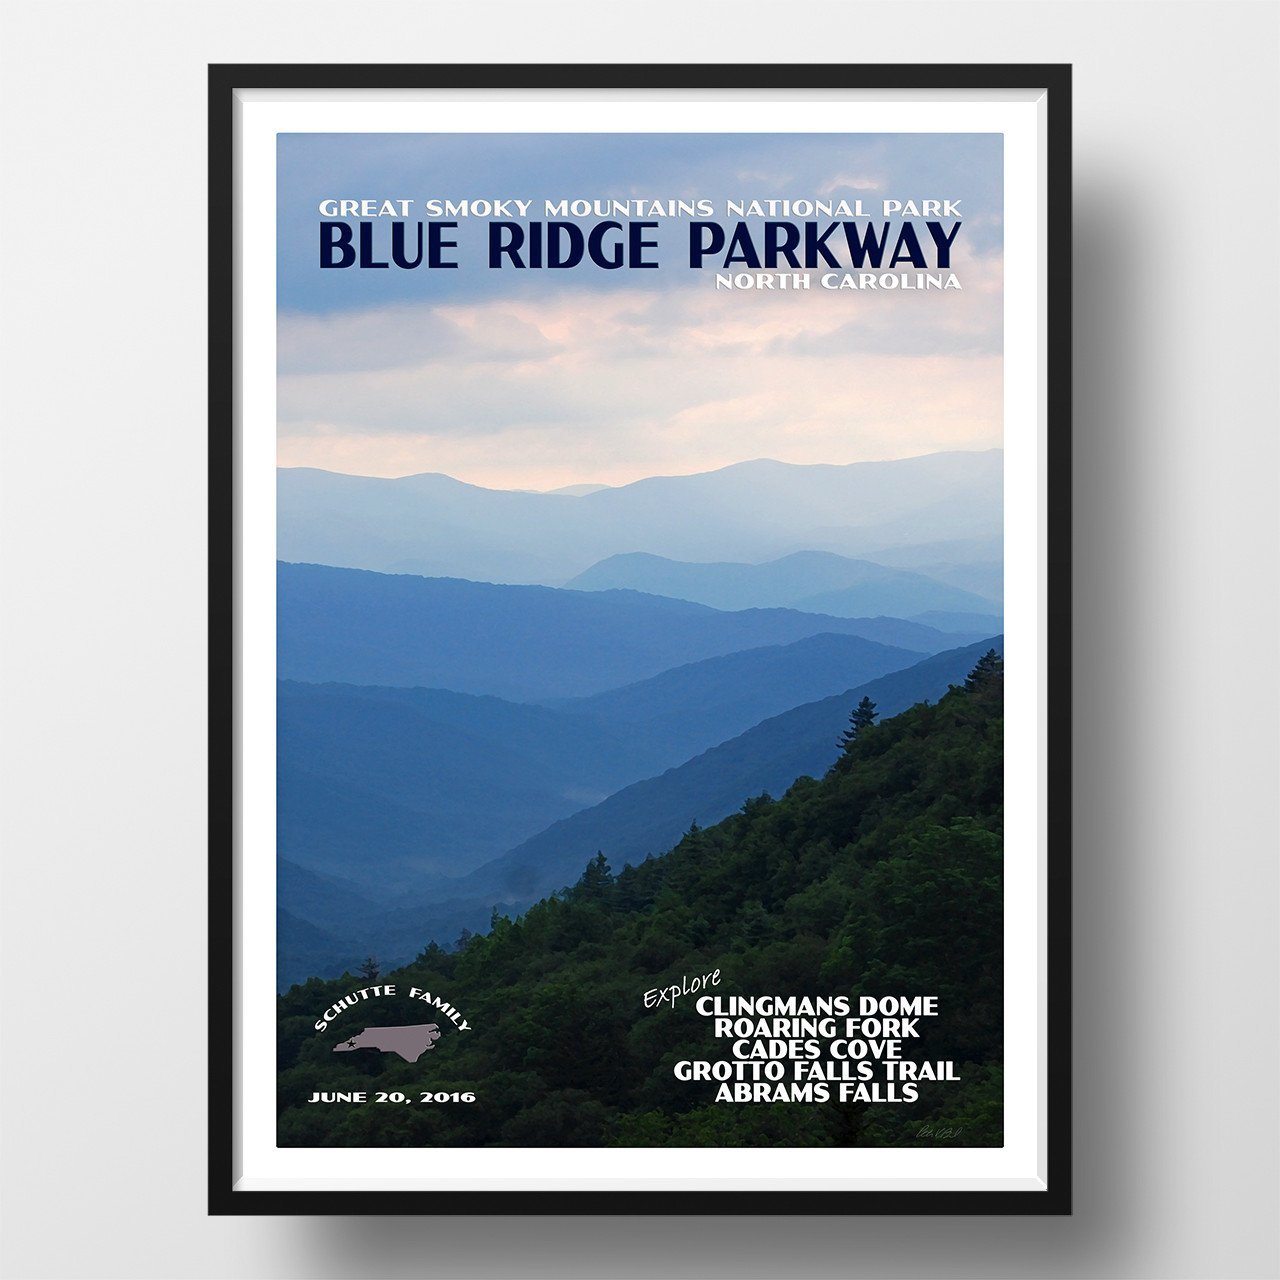 Great Smoky Mountains National Park Poster-Blue Ridge Parkway (Personalized)